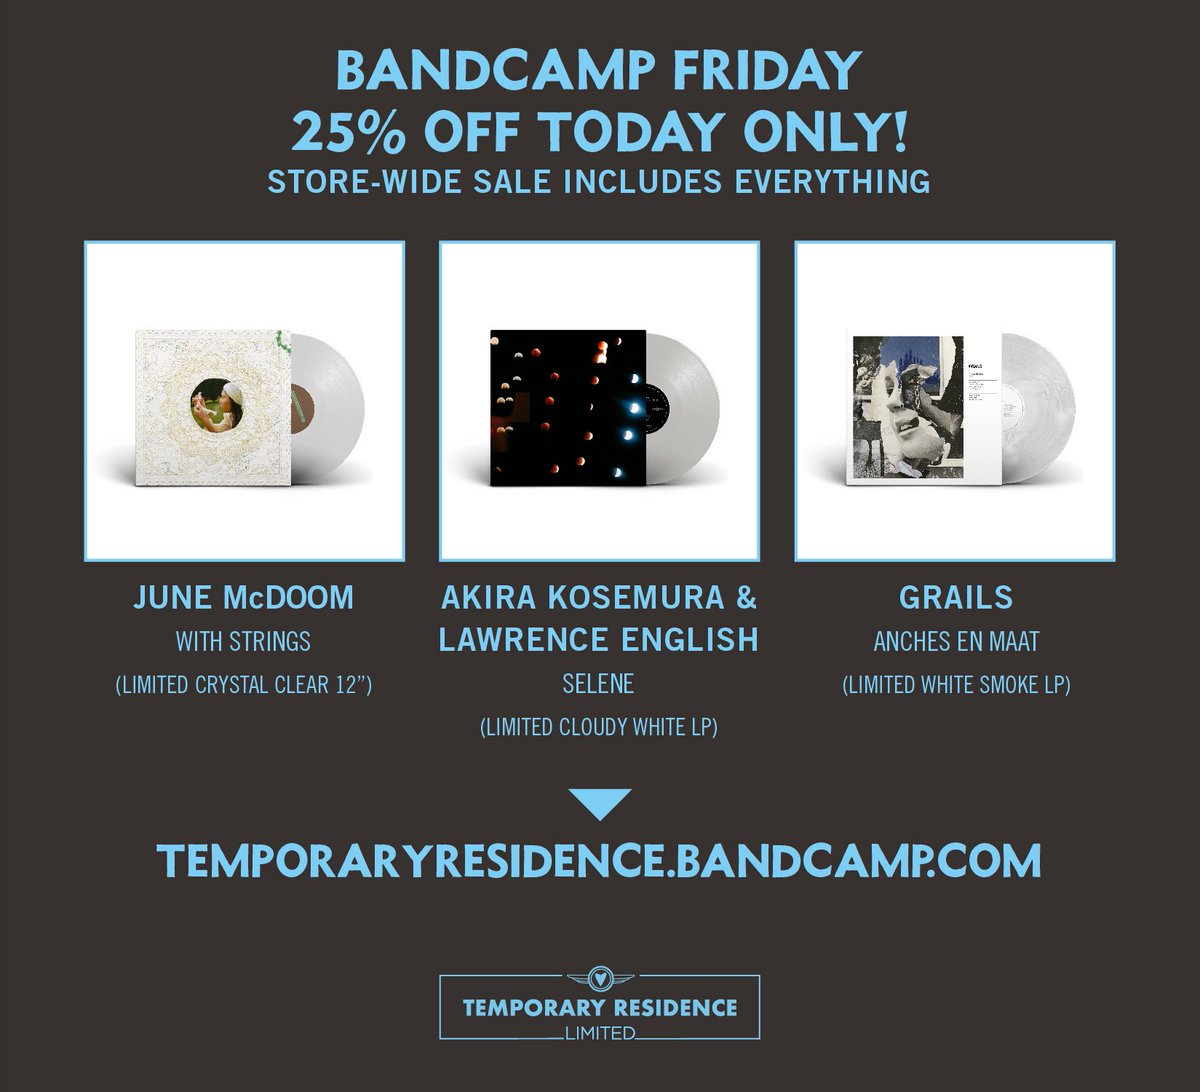 We are entering the final hours of our massive 25% off sale in our @Bandcamp shop! It includes EVERYTHING new and old, including new ones from @akira_kosemura & Lawrence English, June McDoom, and Grails! Dreams come true: temporaryresidence.bandcamp.com